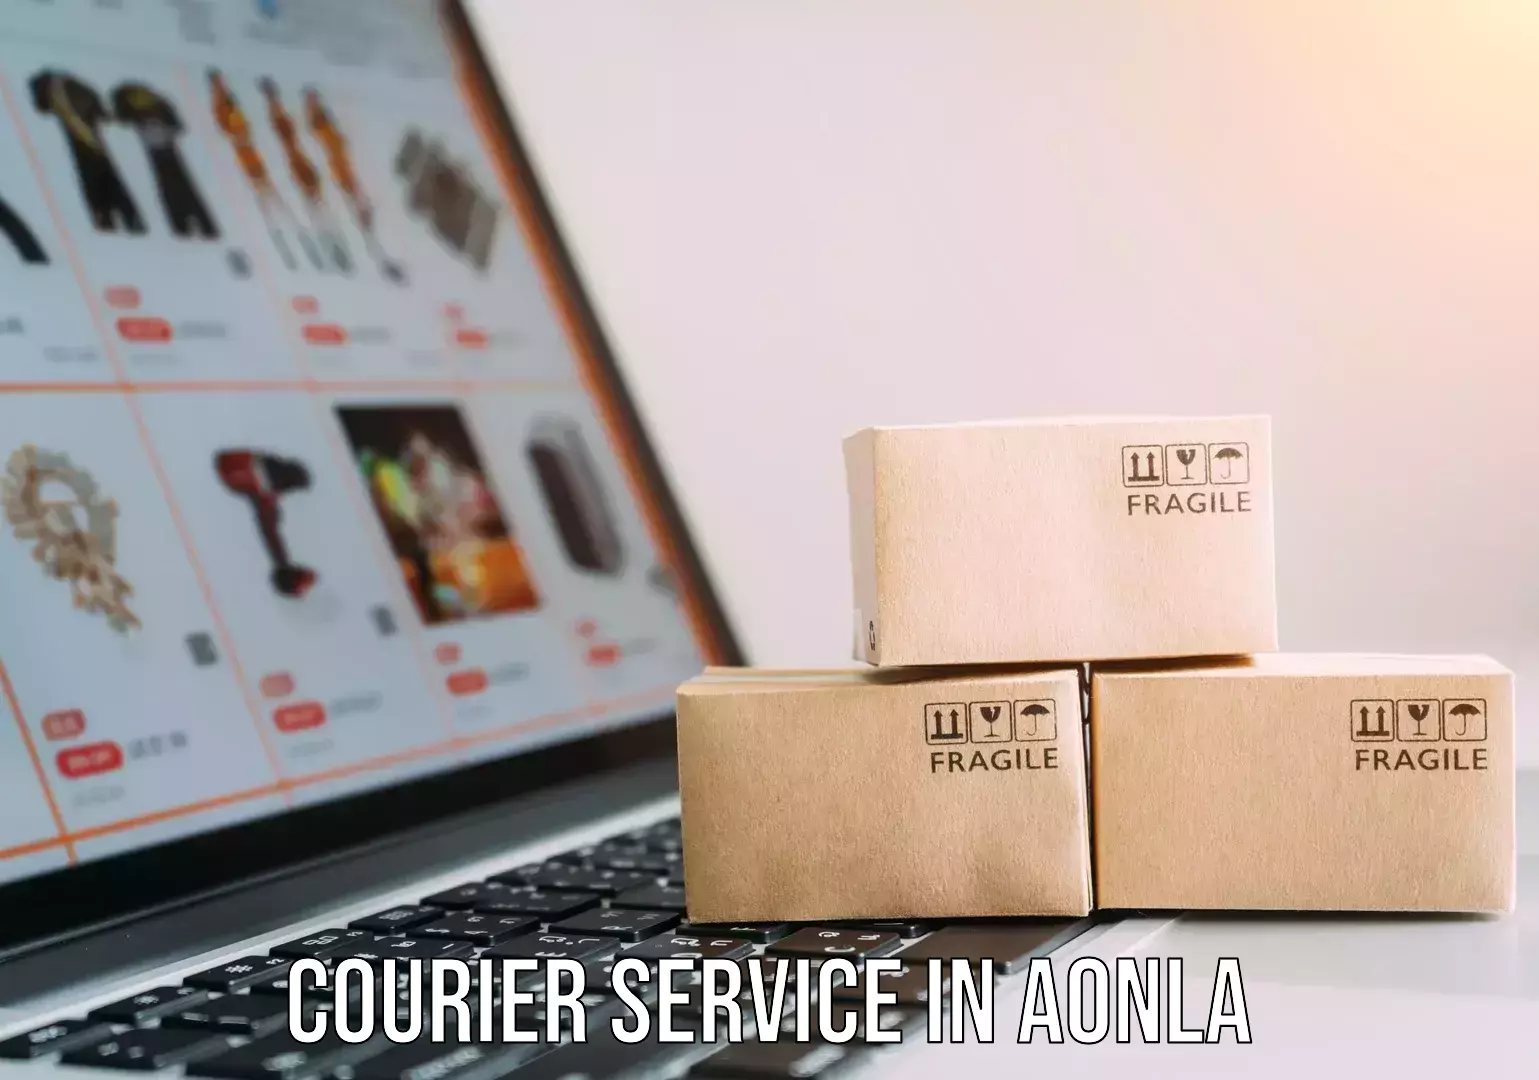 Weekend courier service in Aonla